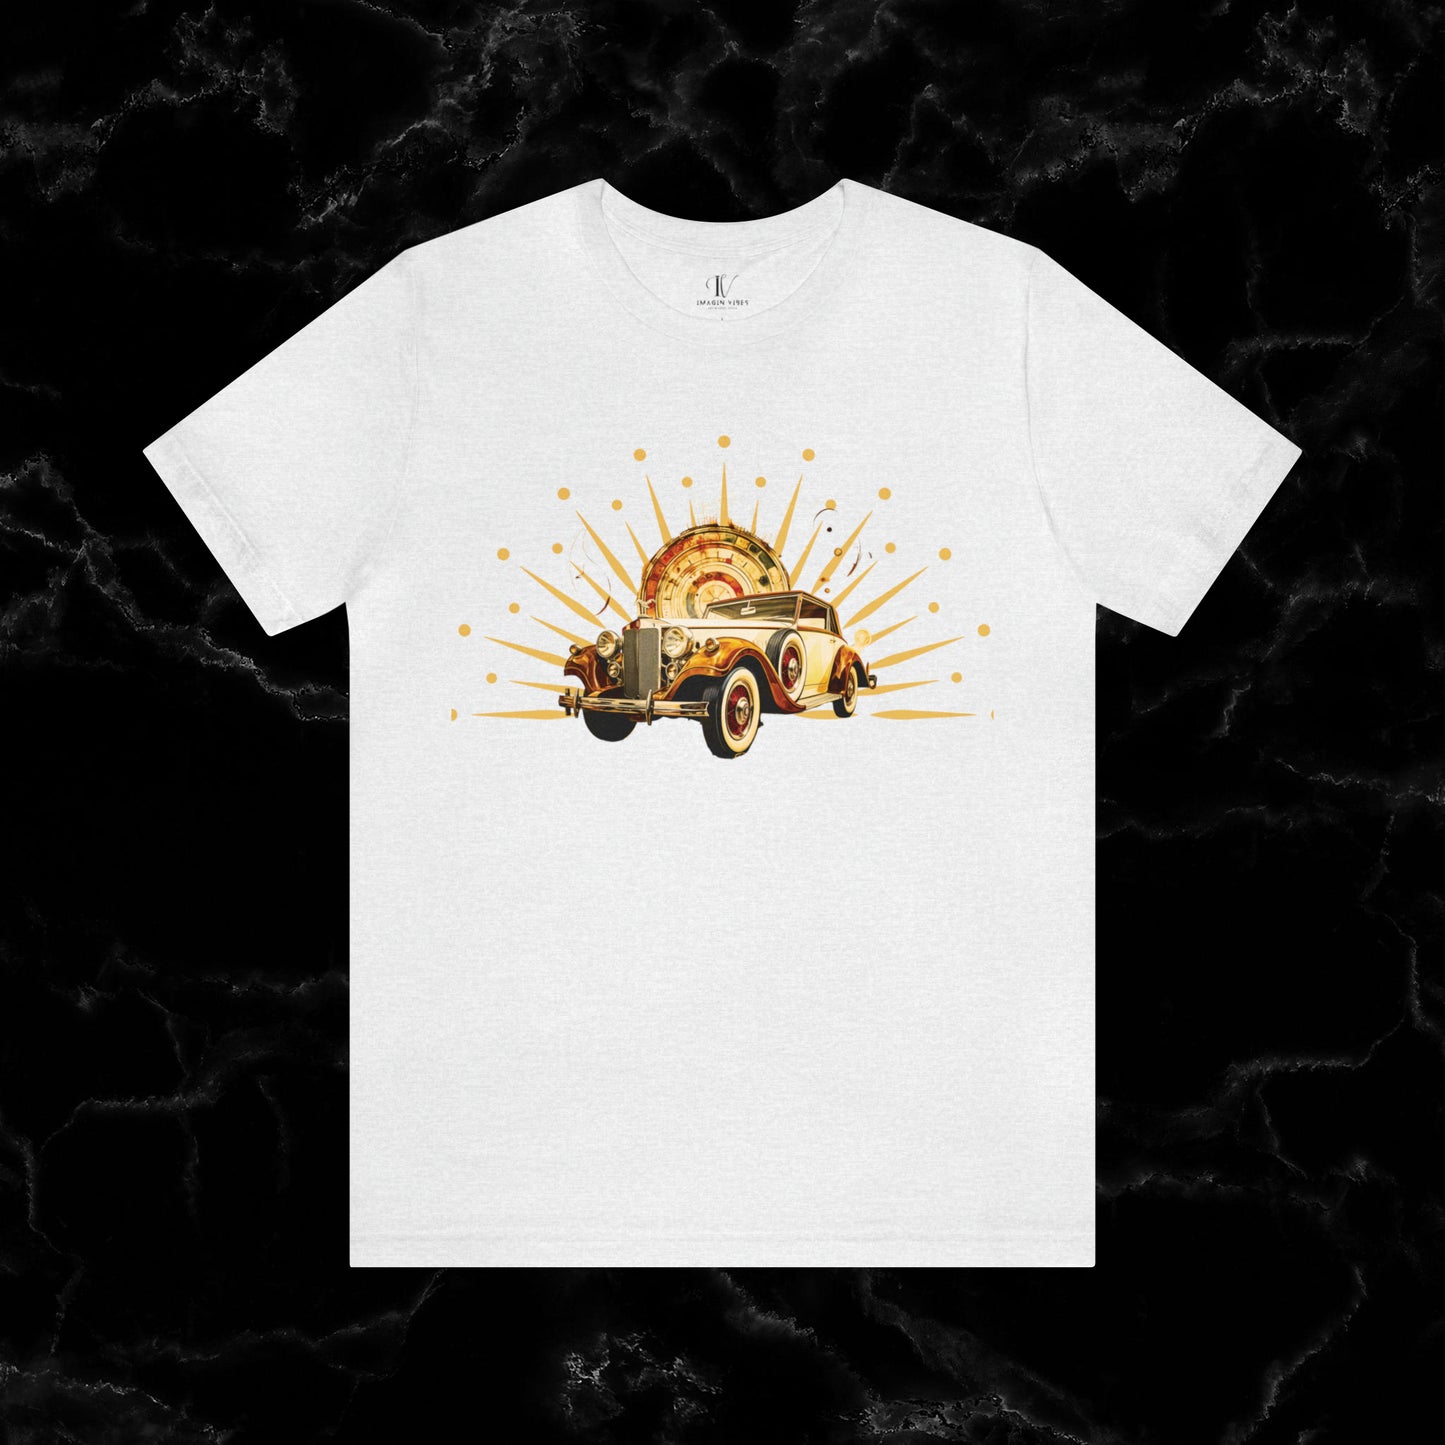 Vintage Car Enthusiast T-Shirt with Classic Wheels and Timeless Appeal Nostalgic T-Shirt Ash S 